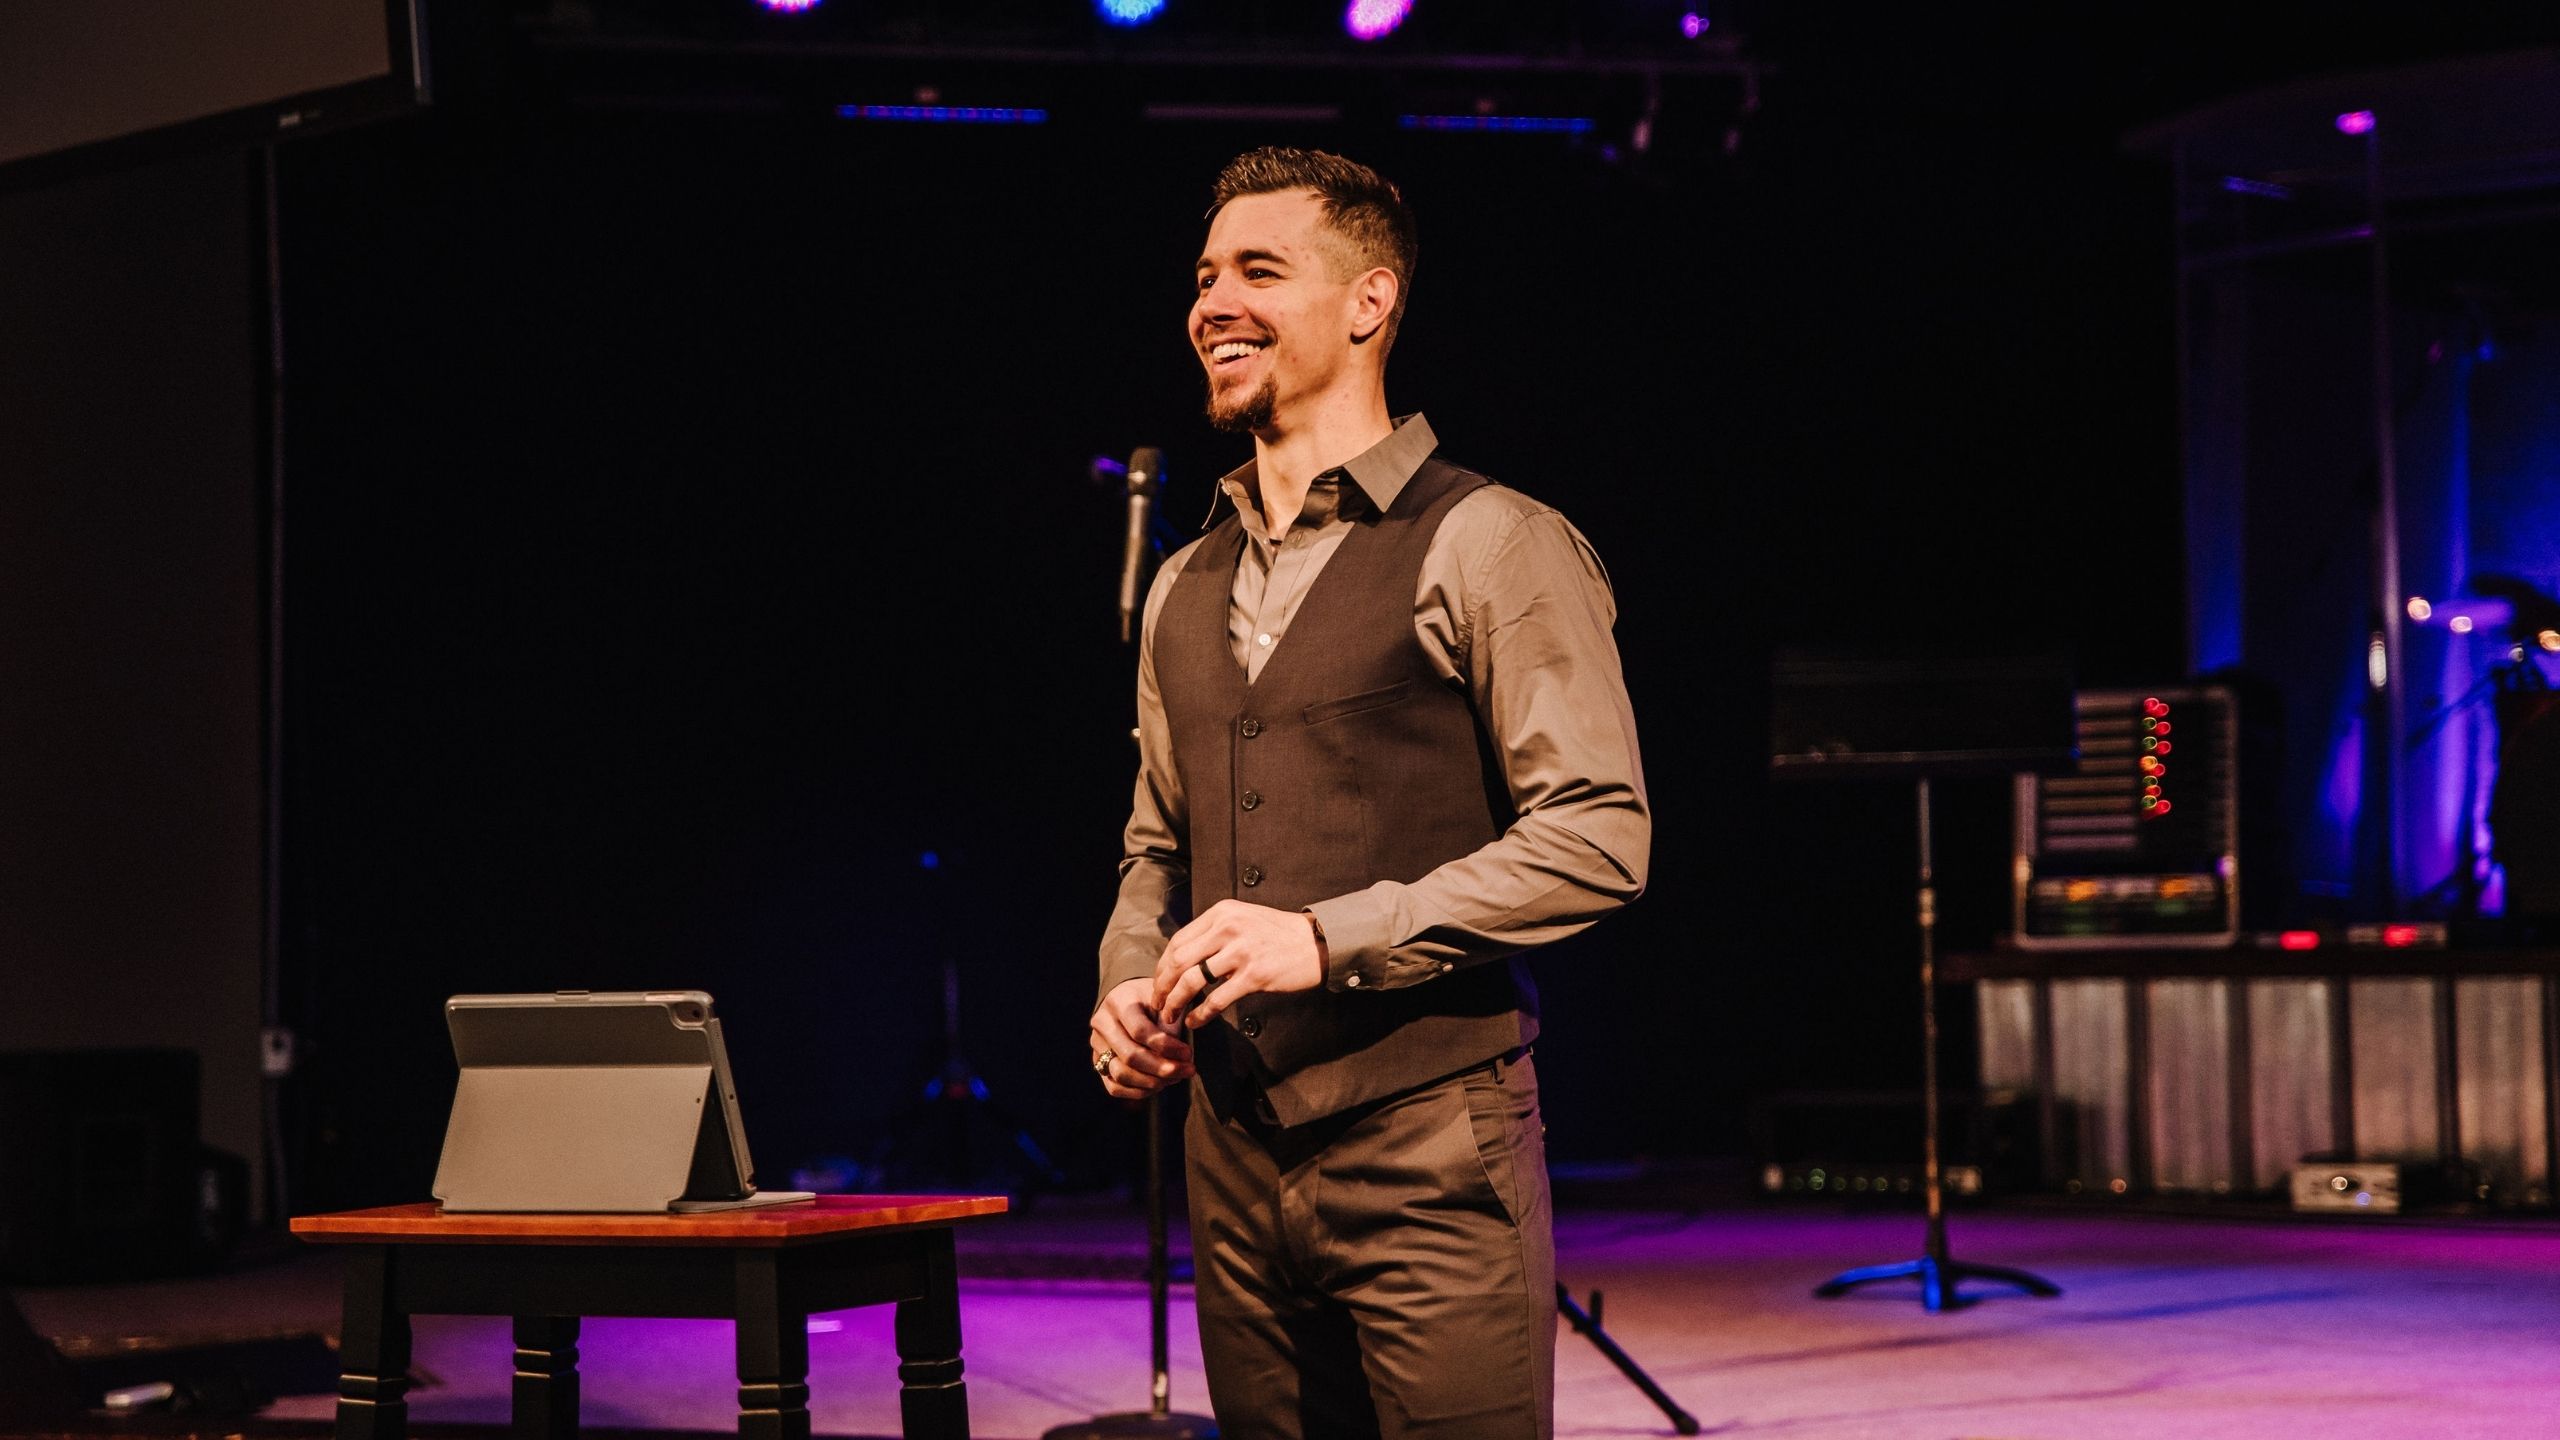 Man in a suit standing on a stage smiling